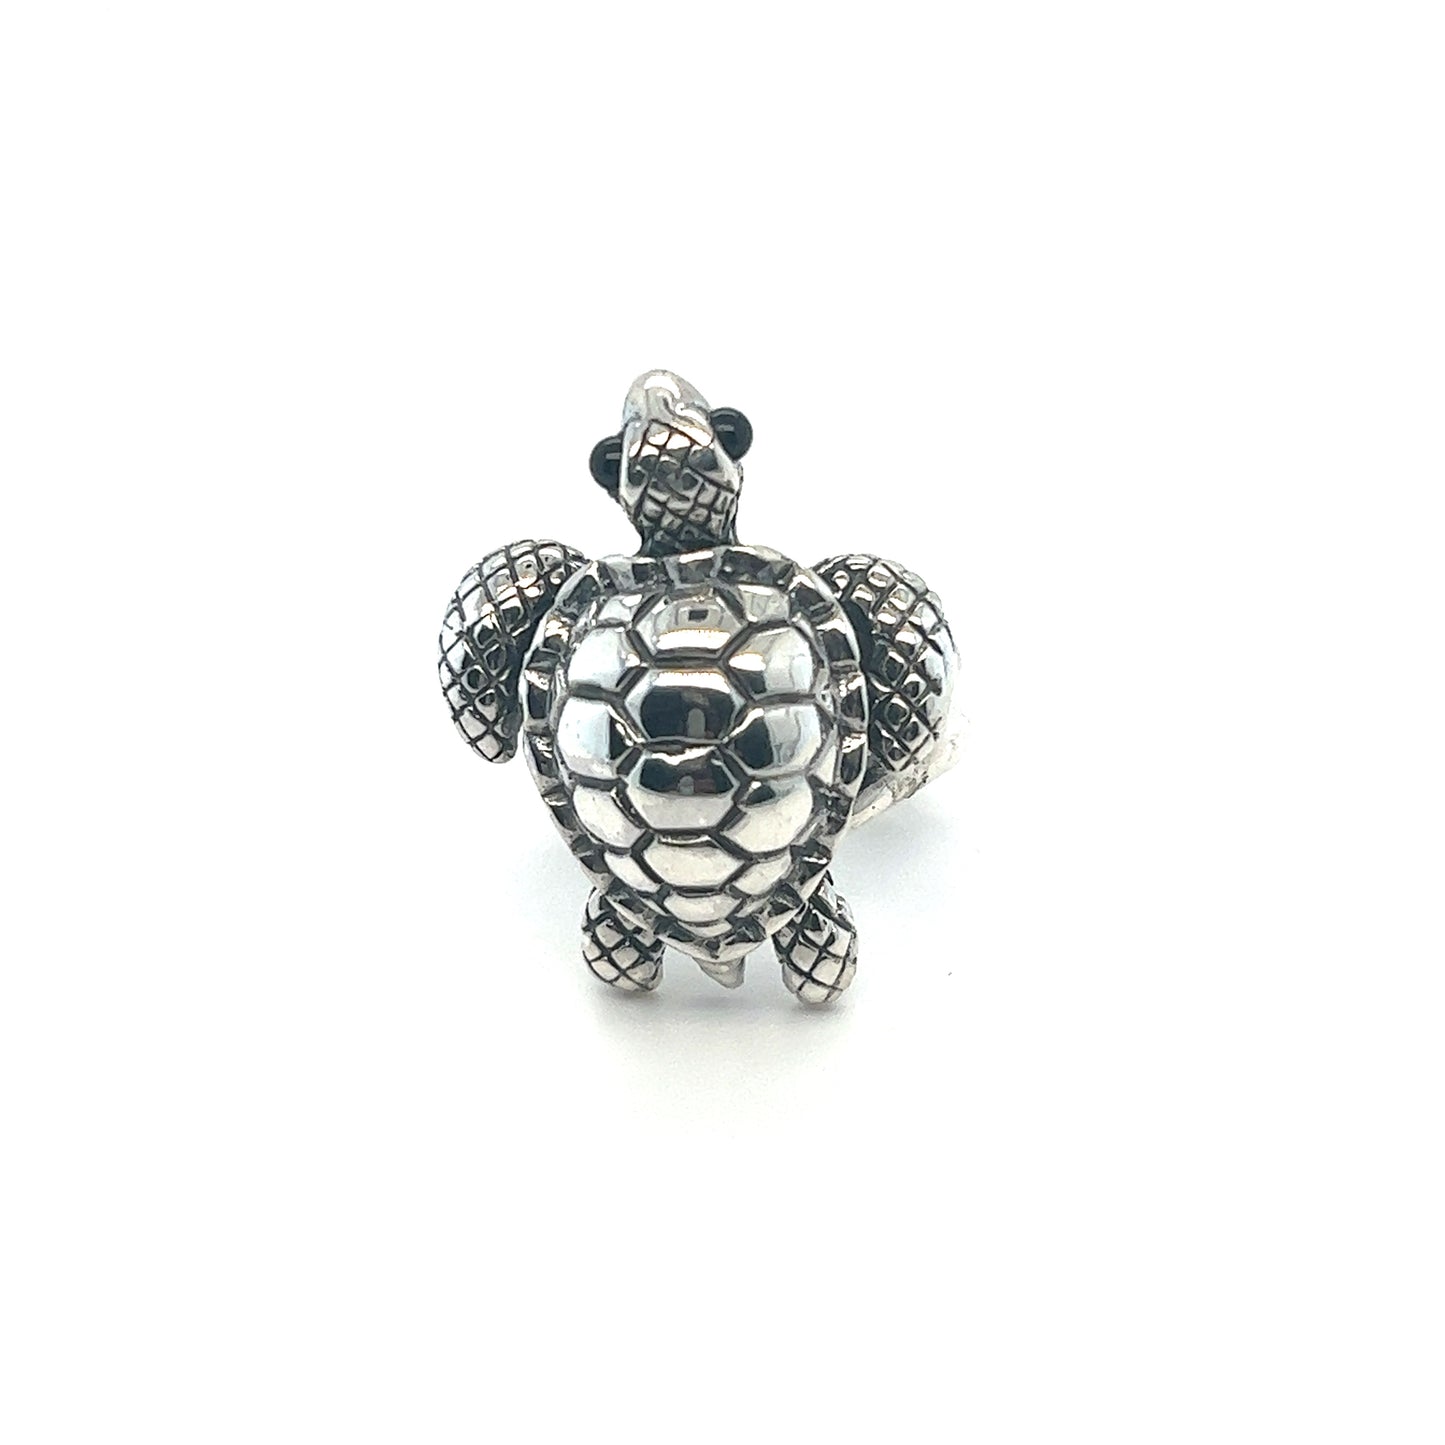 A designer Statement Turtle Ring on a white background.